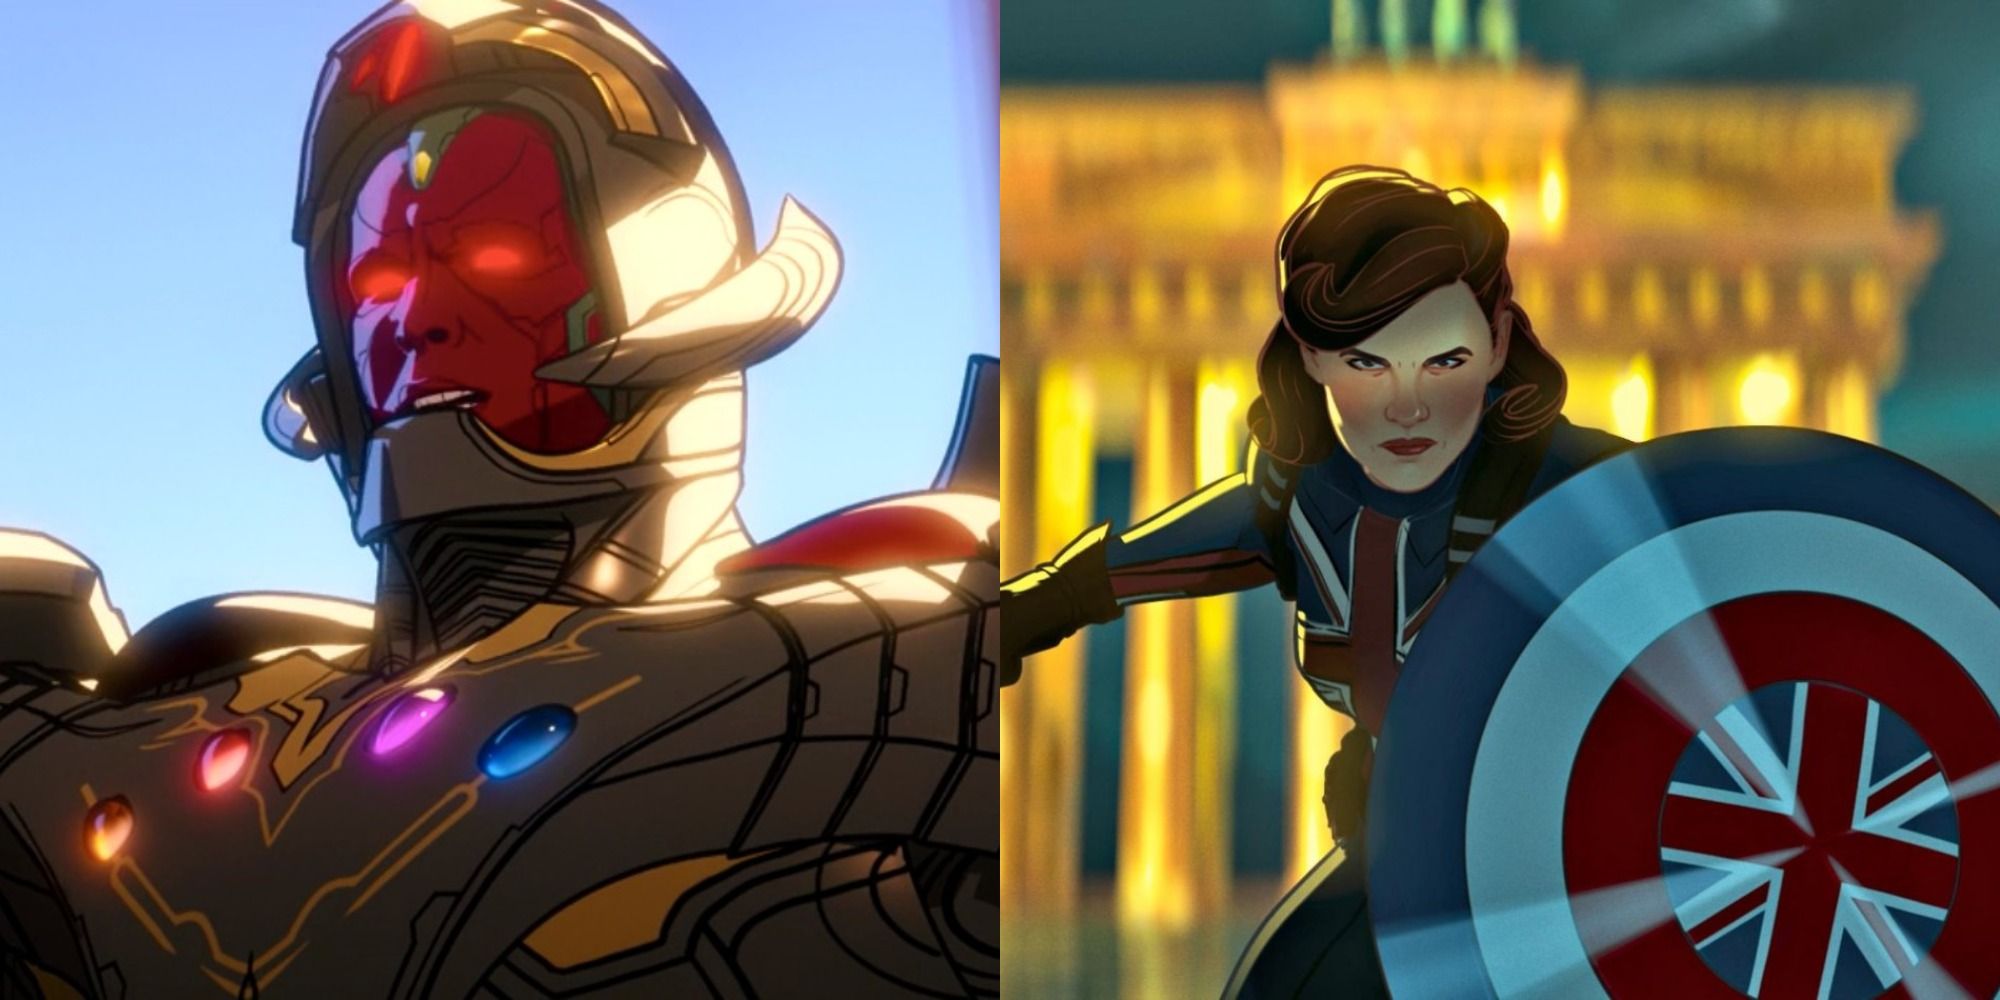 Split image of Ultron in his armor and Peggy Carter with her shield in What If